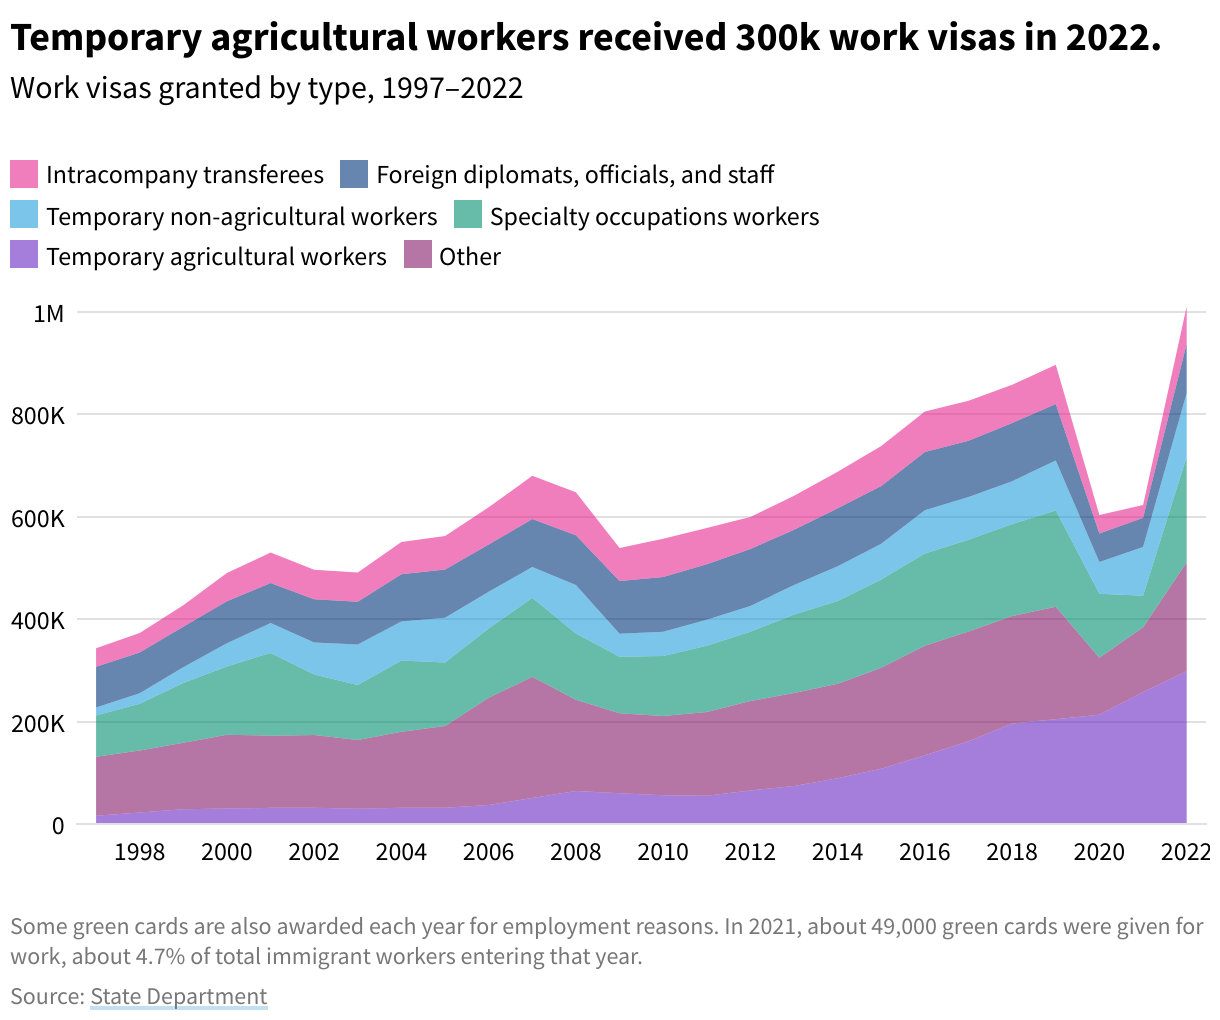 Area chart showing work visas granted by type from 1997 to 2022. 